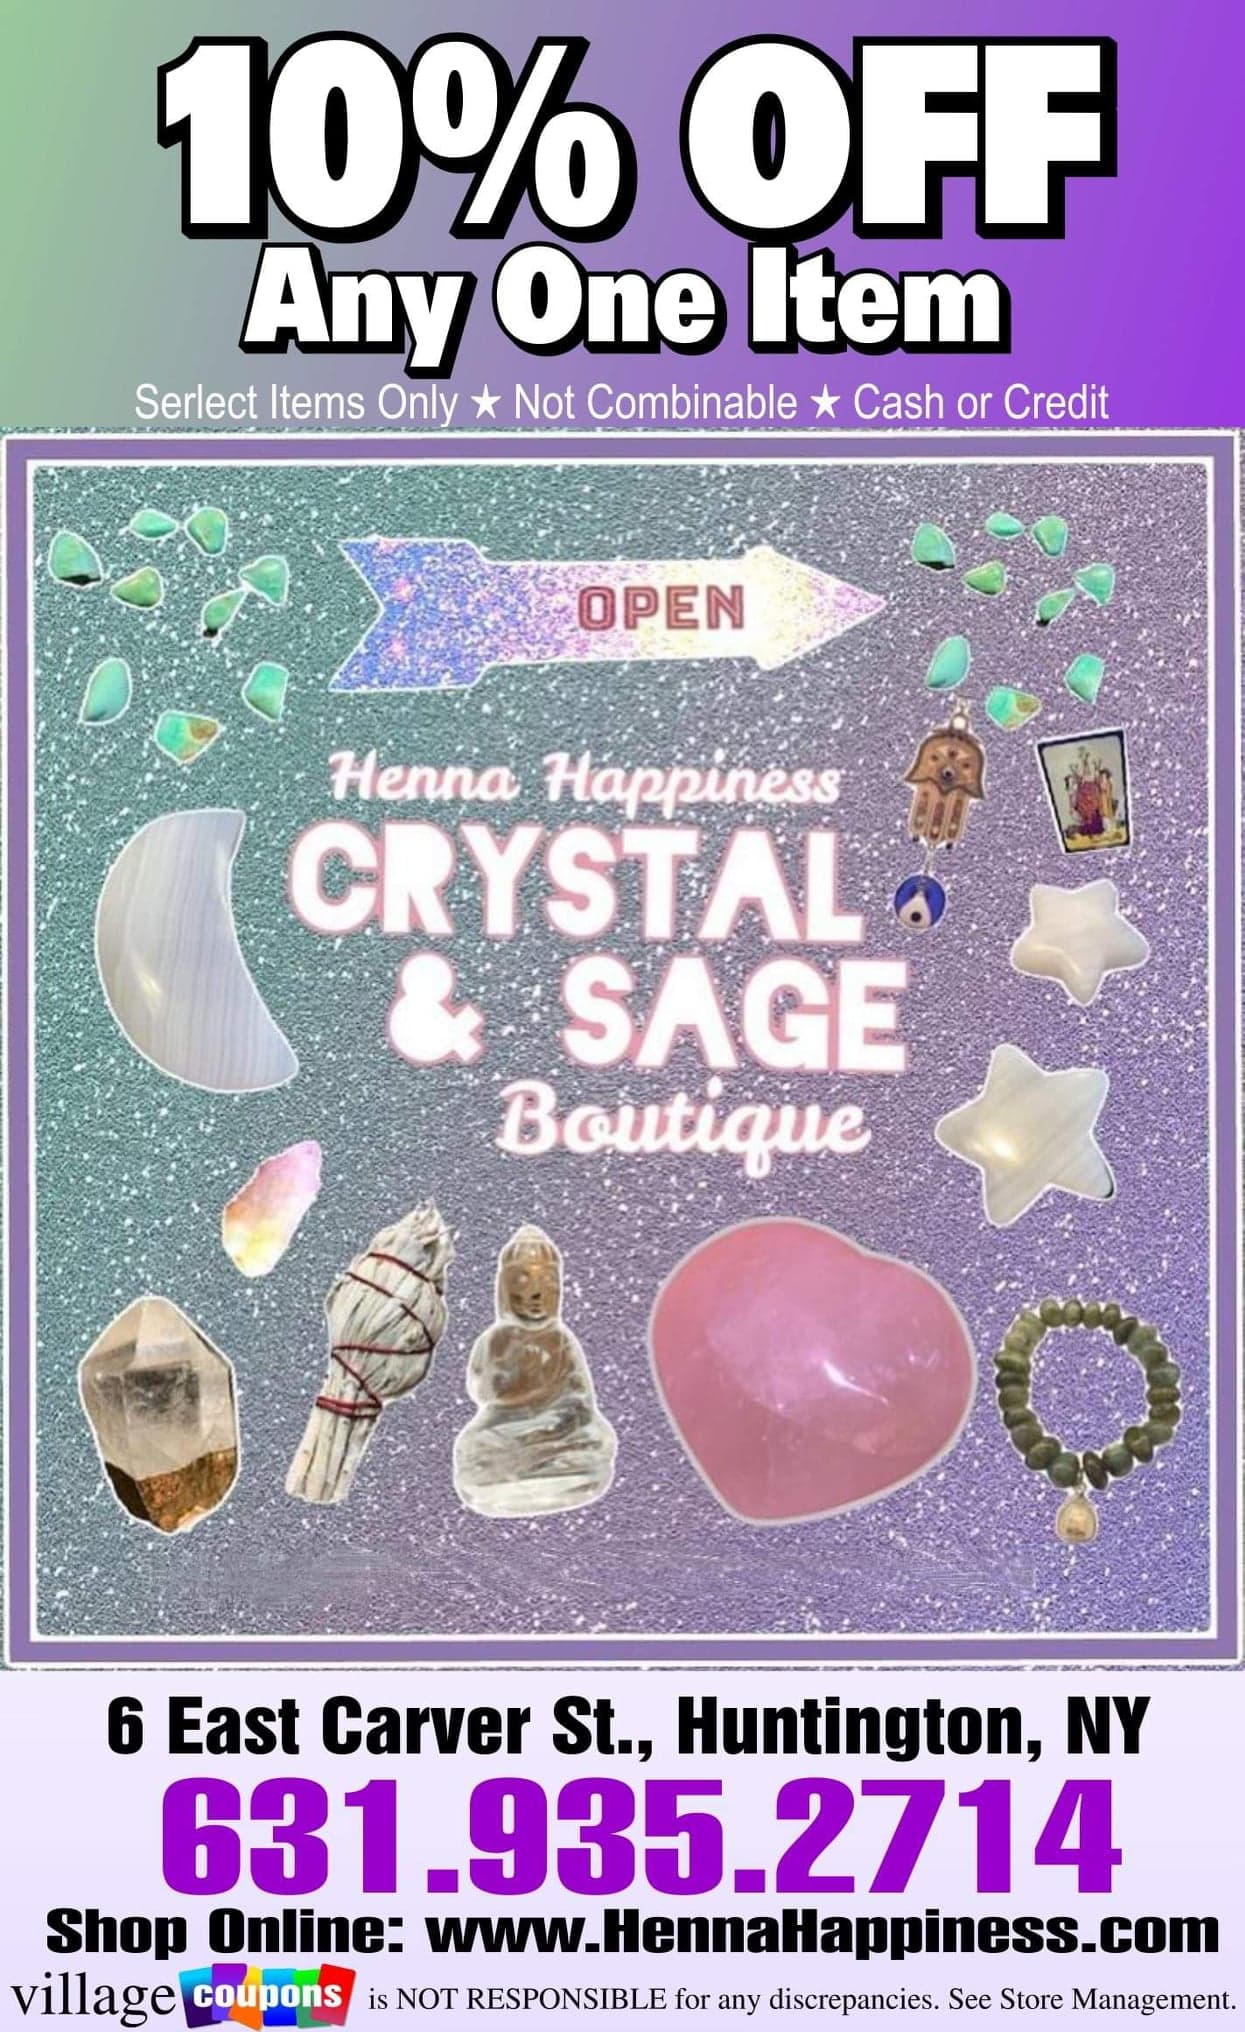 An advertisement for henna happiness crystal & sage boutique